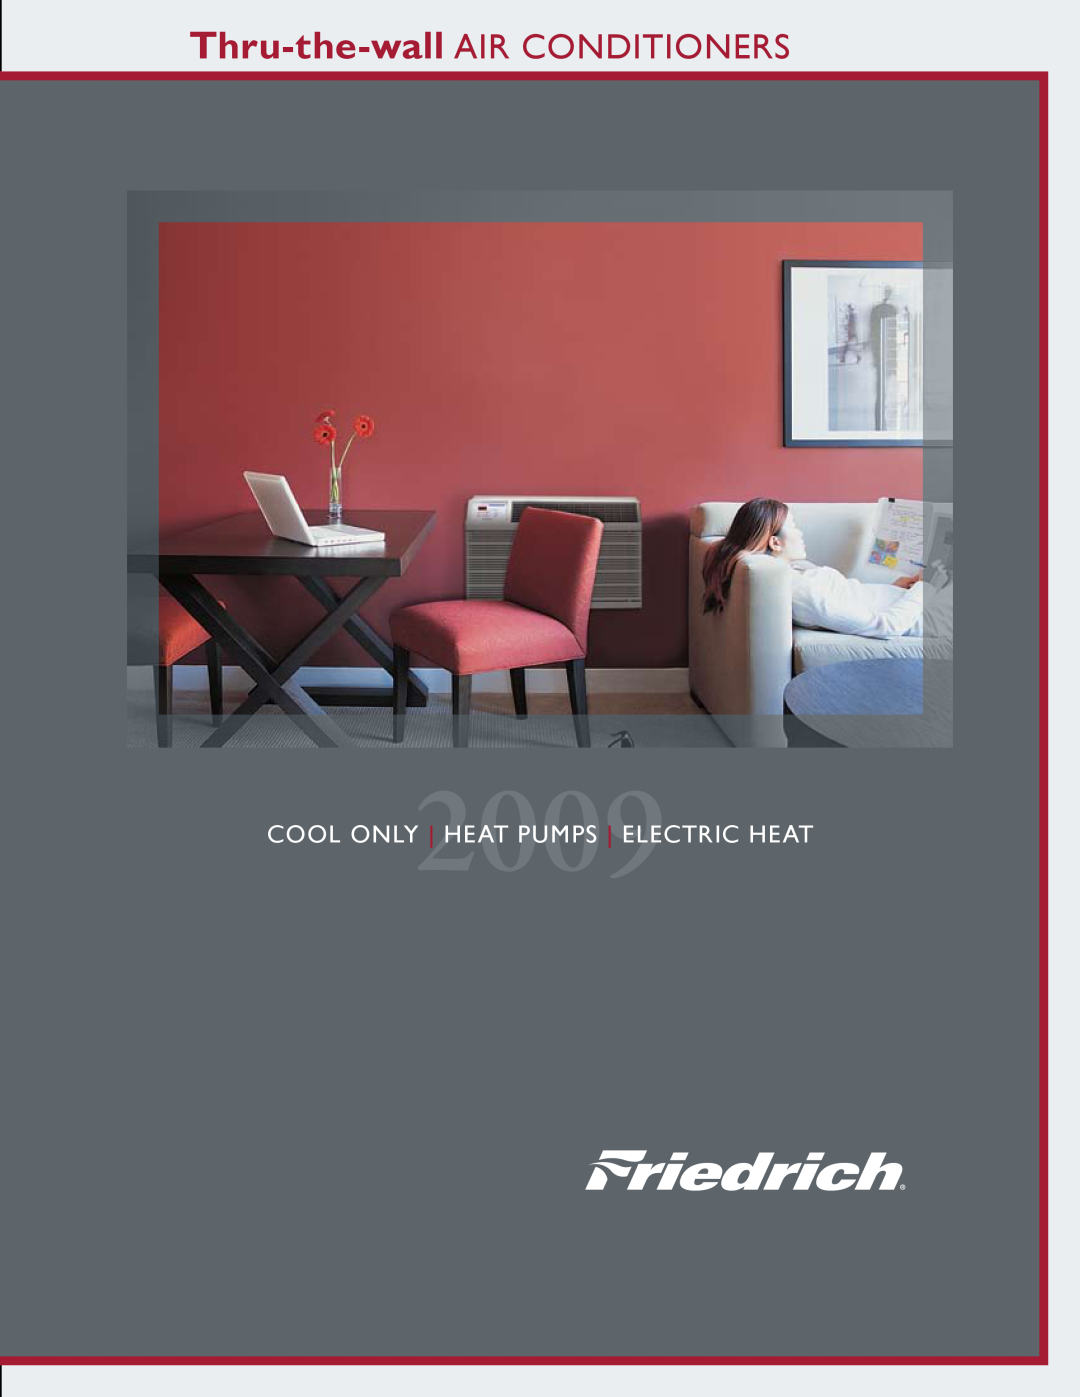 Friedrich Thru-the-Wall Air Conditioners manual Thru-the-wall AIR CONDITIONERS, cool only2009 heat pumps electric heat 